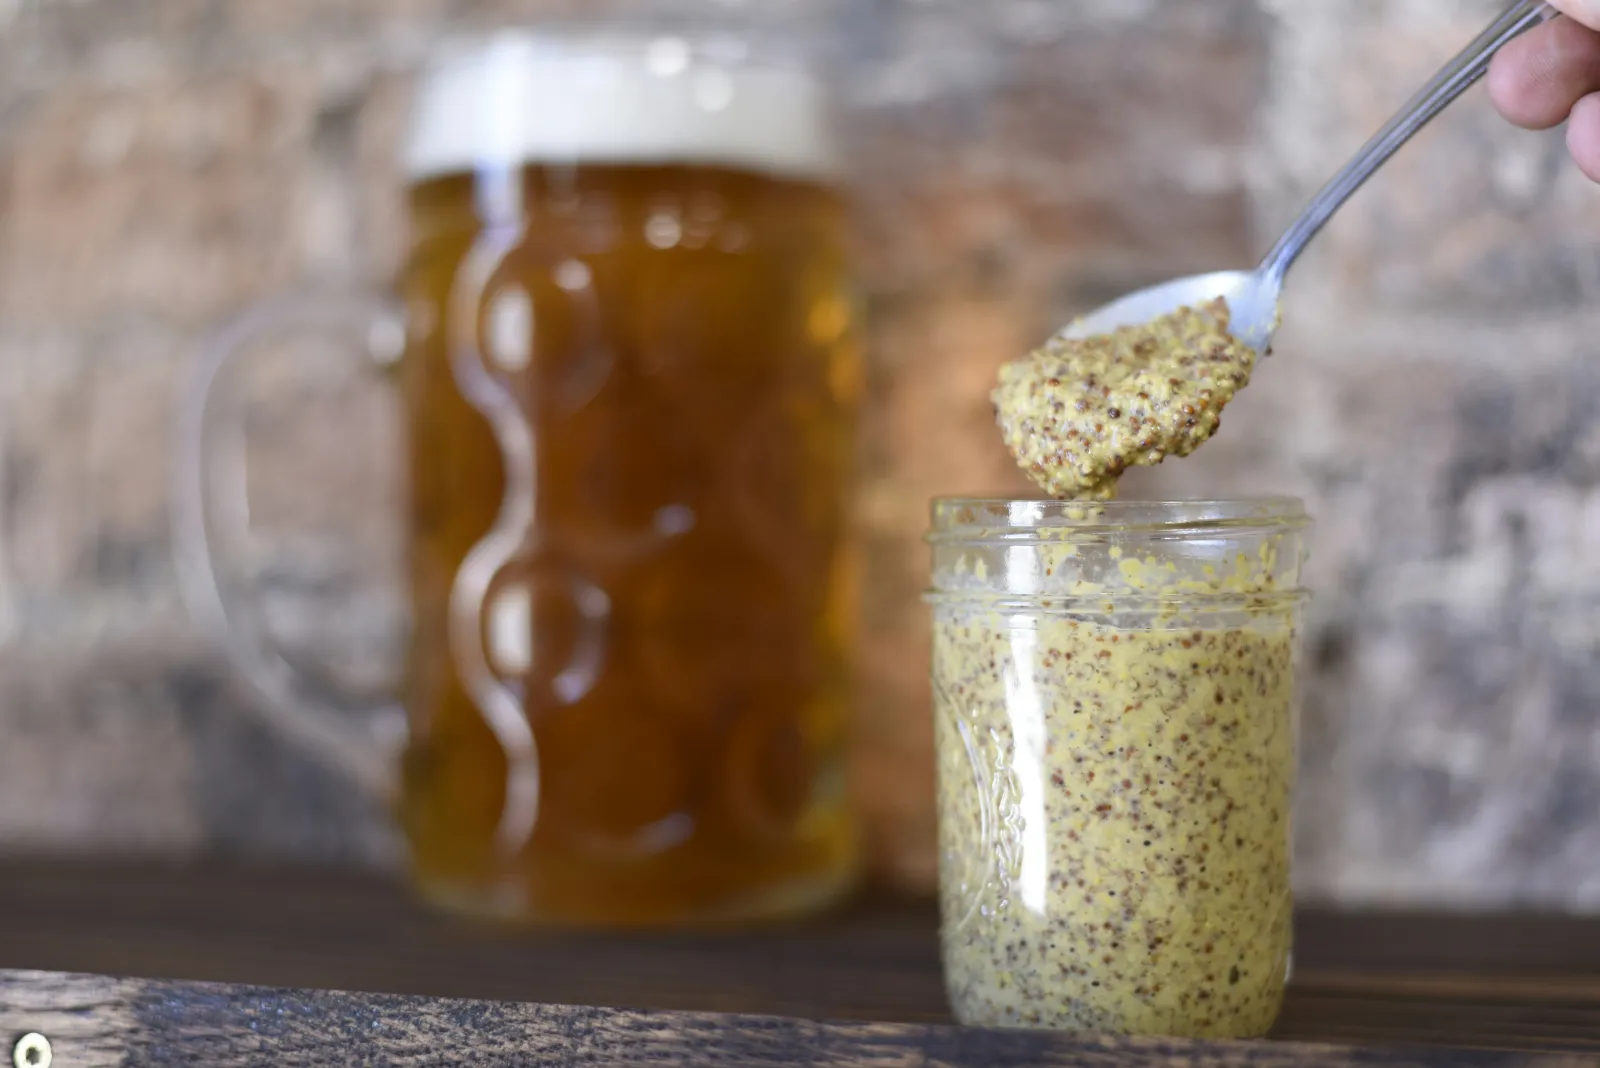 Close up of a glass jar of mustard with a mug of yellow beer in the background